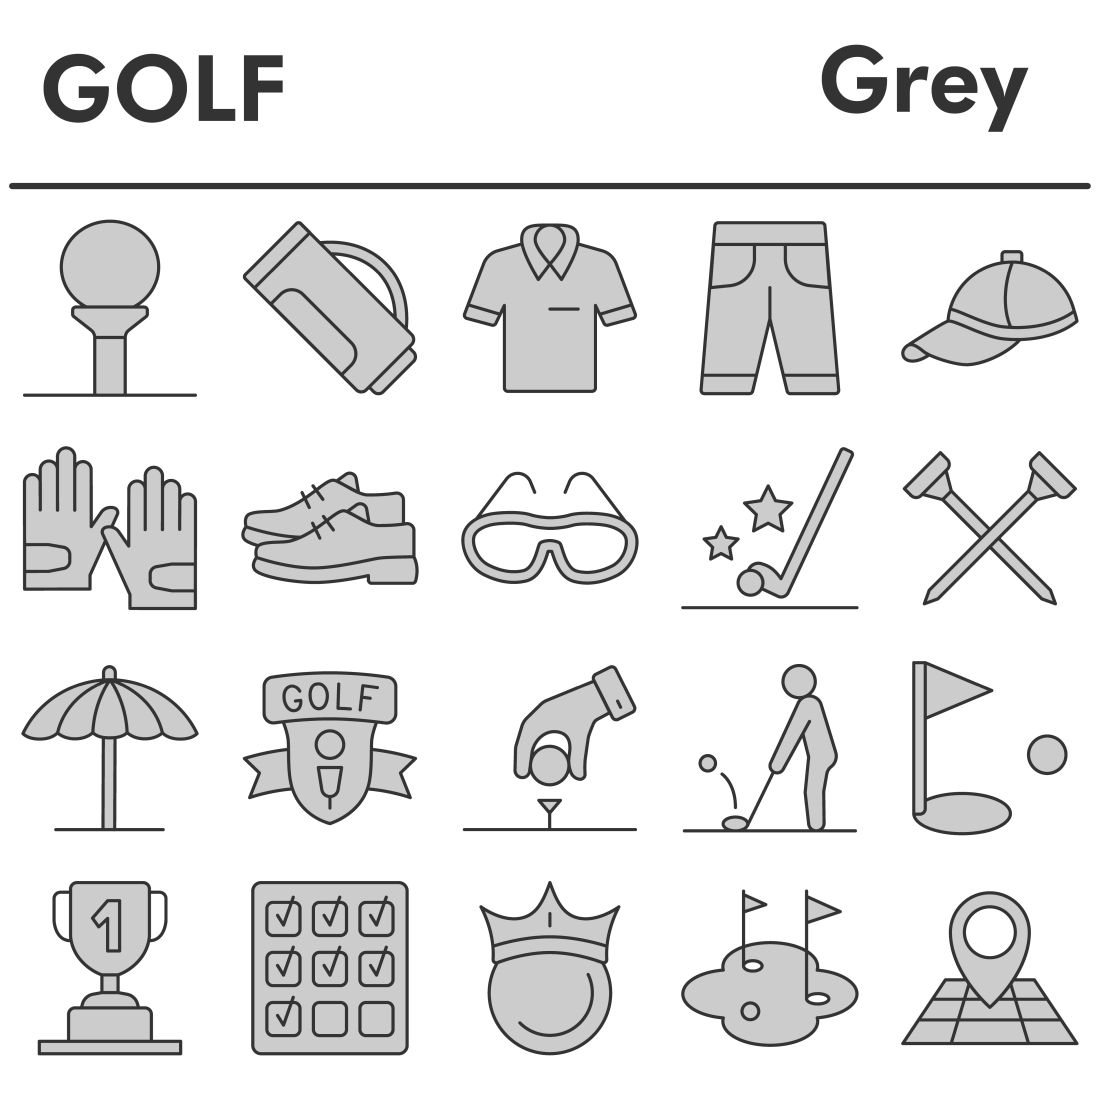 Golf icons set, gray style cover image.